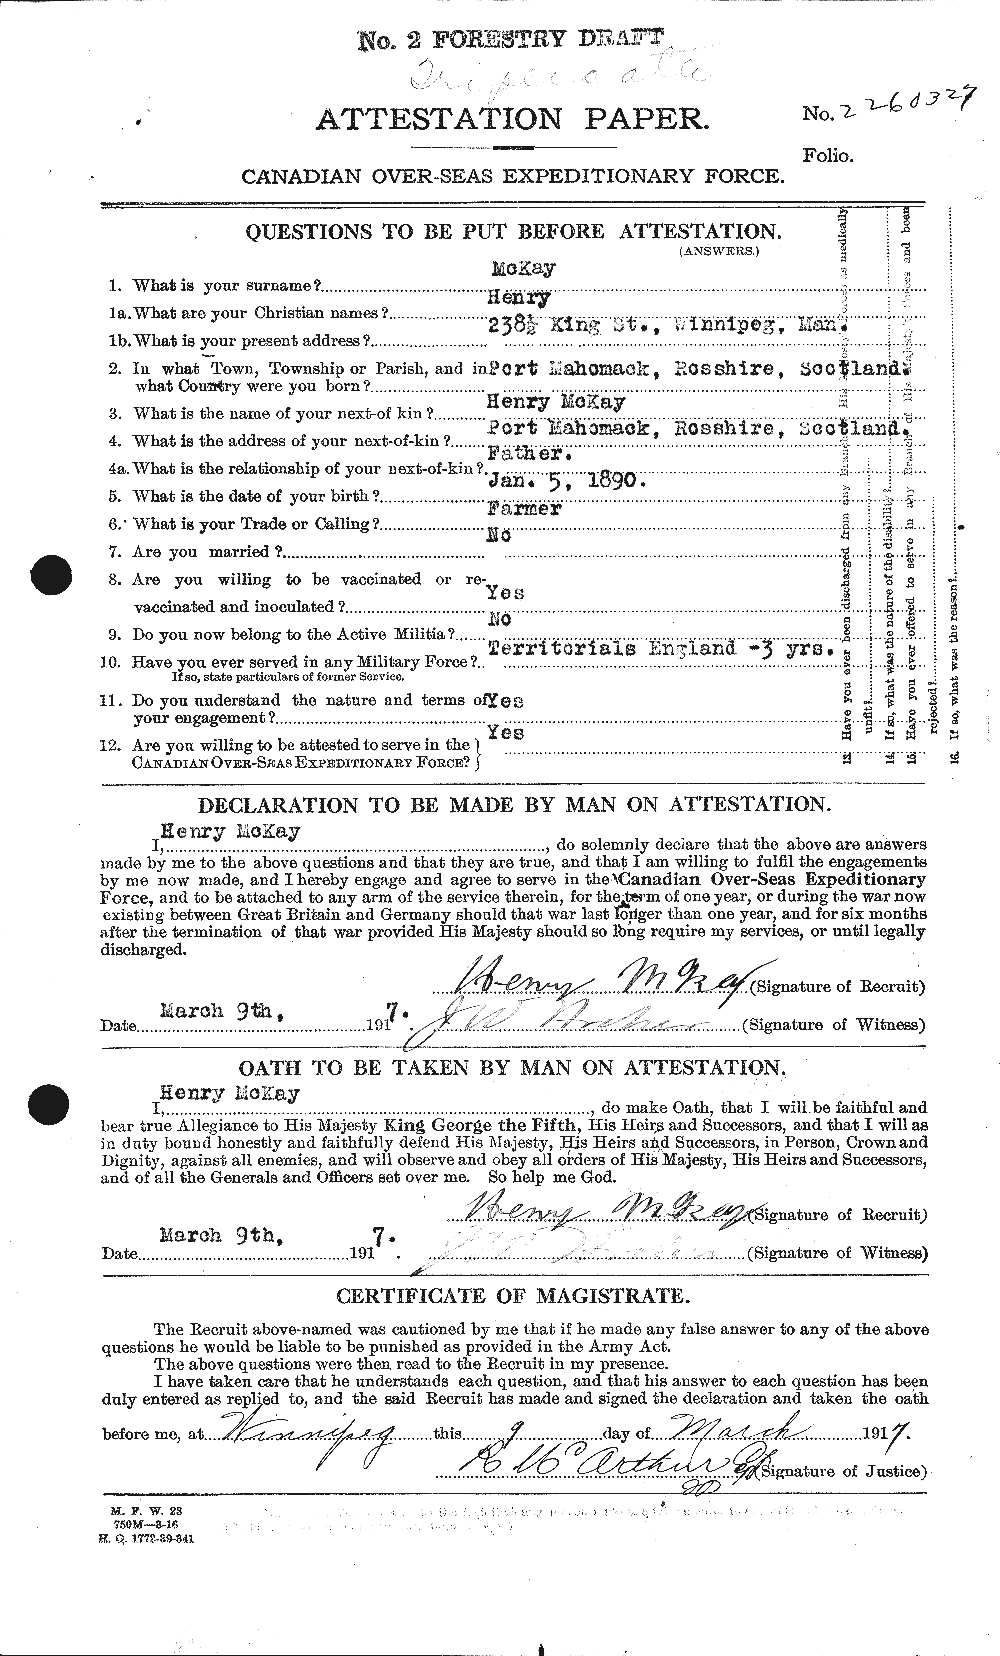 Personnel Records of the First World War - CEF 534745a